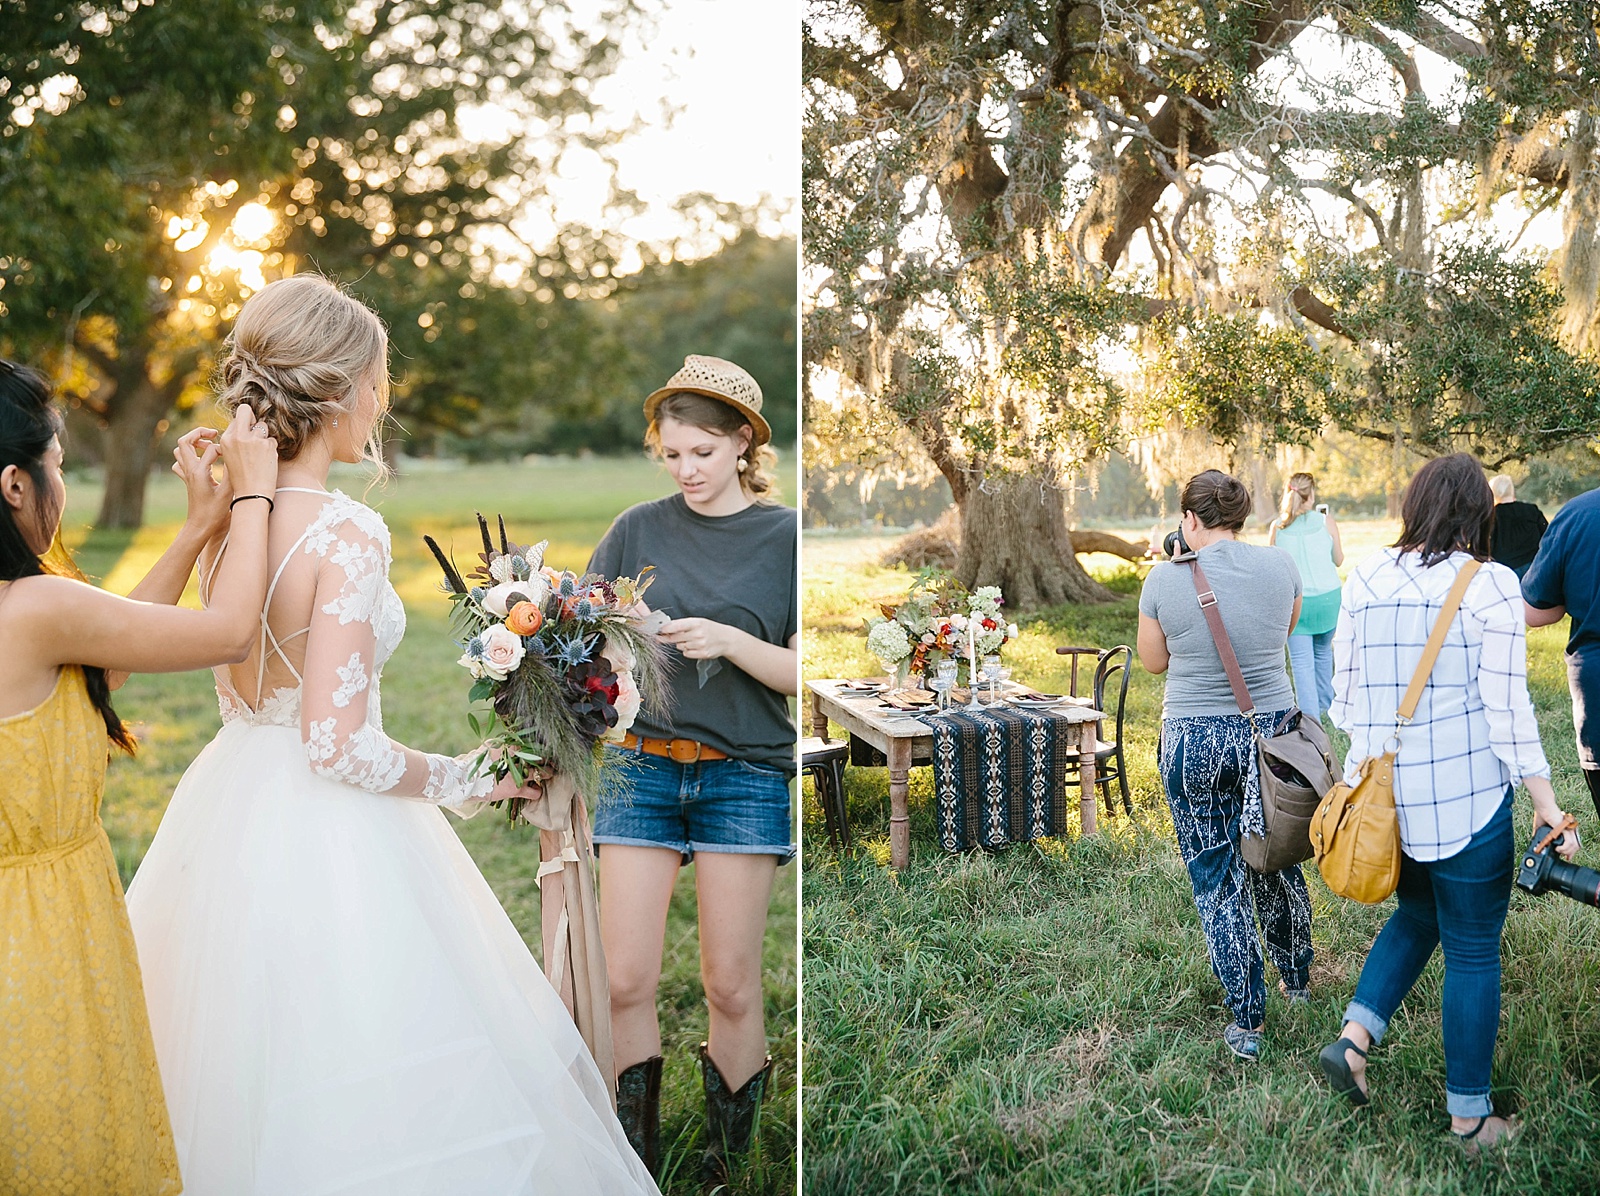 Behind the Scenes of Life and Craft Workshop by Breanna McKendrick Photography